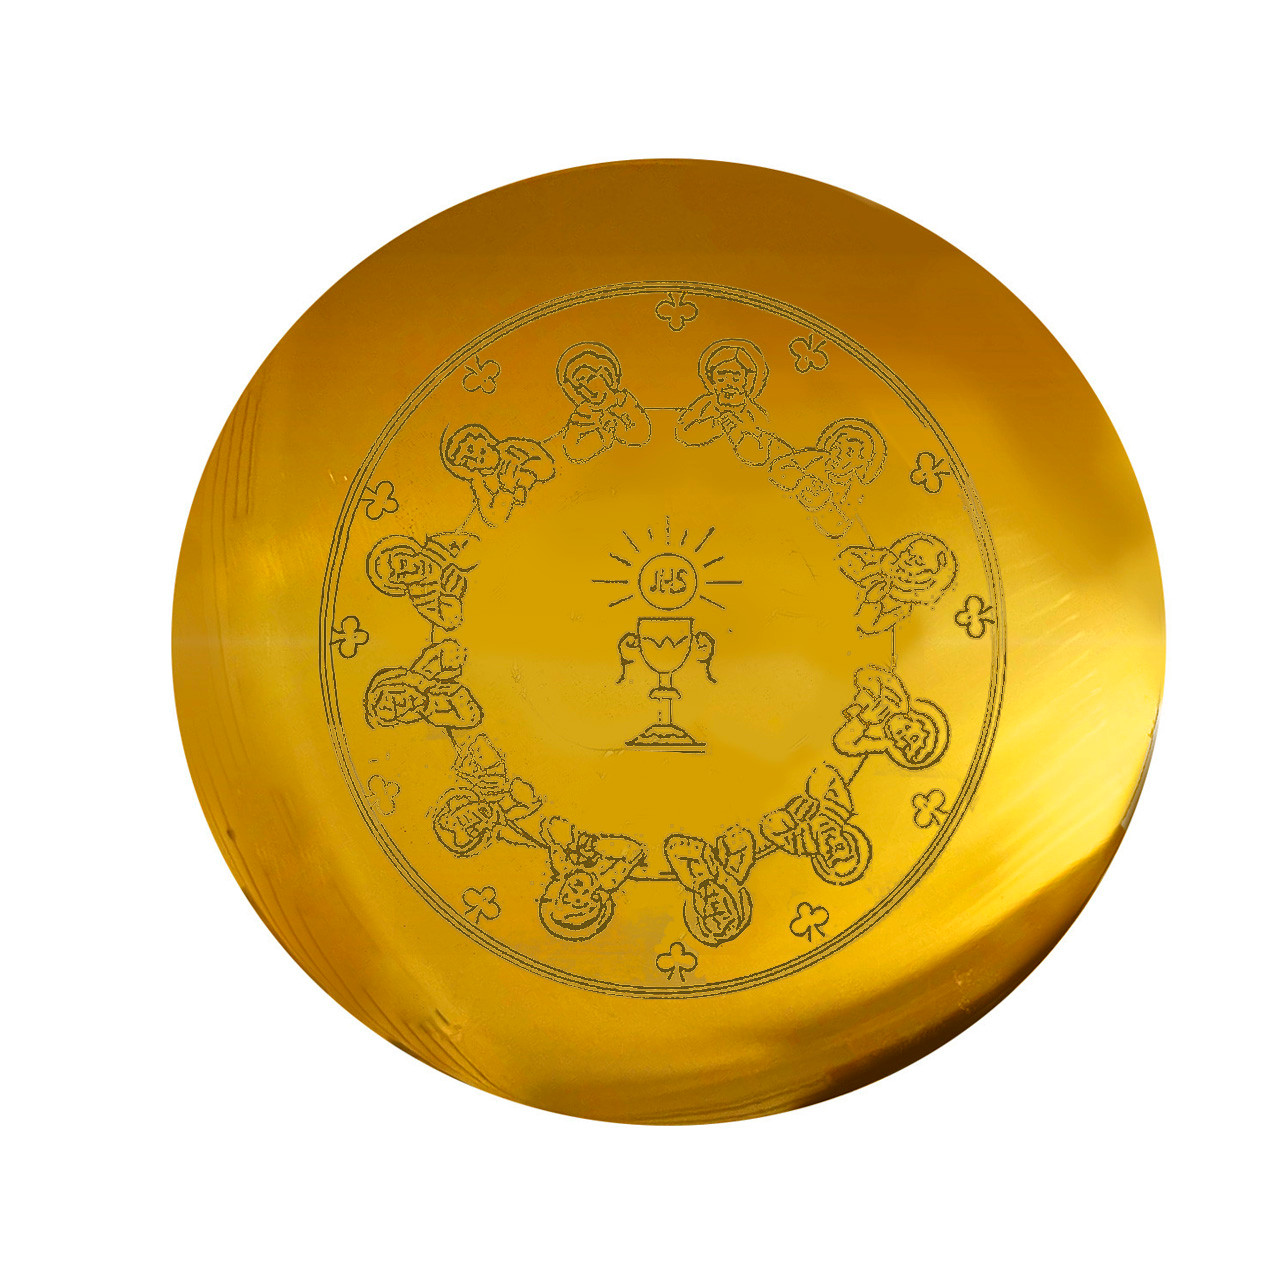 F3 Gold Plate Scale Paten with Engraved Design